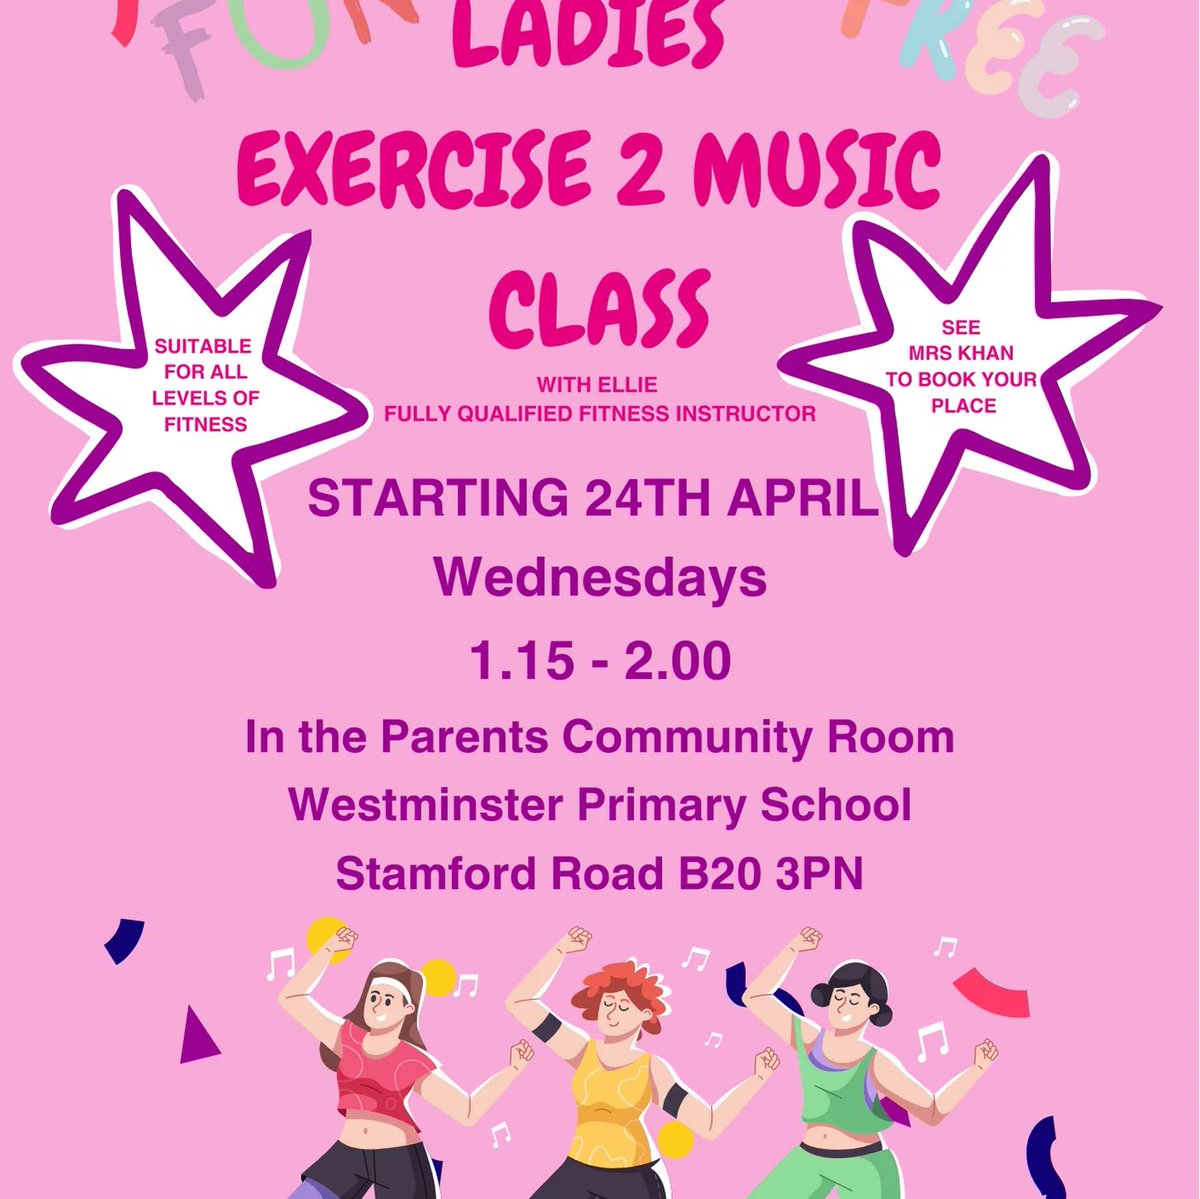 Happy Monday everyone. Please see our new dates and times for our Exercise 2 music classes. One held at Lozells Methodist Church & Community Centre and the other at Westminster primary school starting this Wednesday. Be sure to join us and let the fun begin 😊 @Sport_England